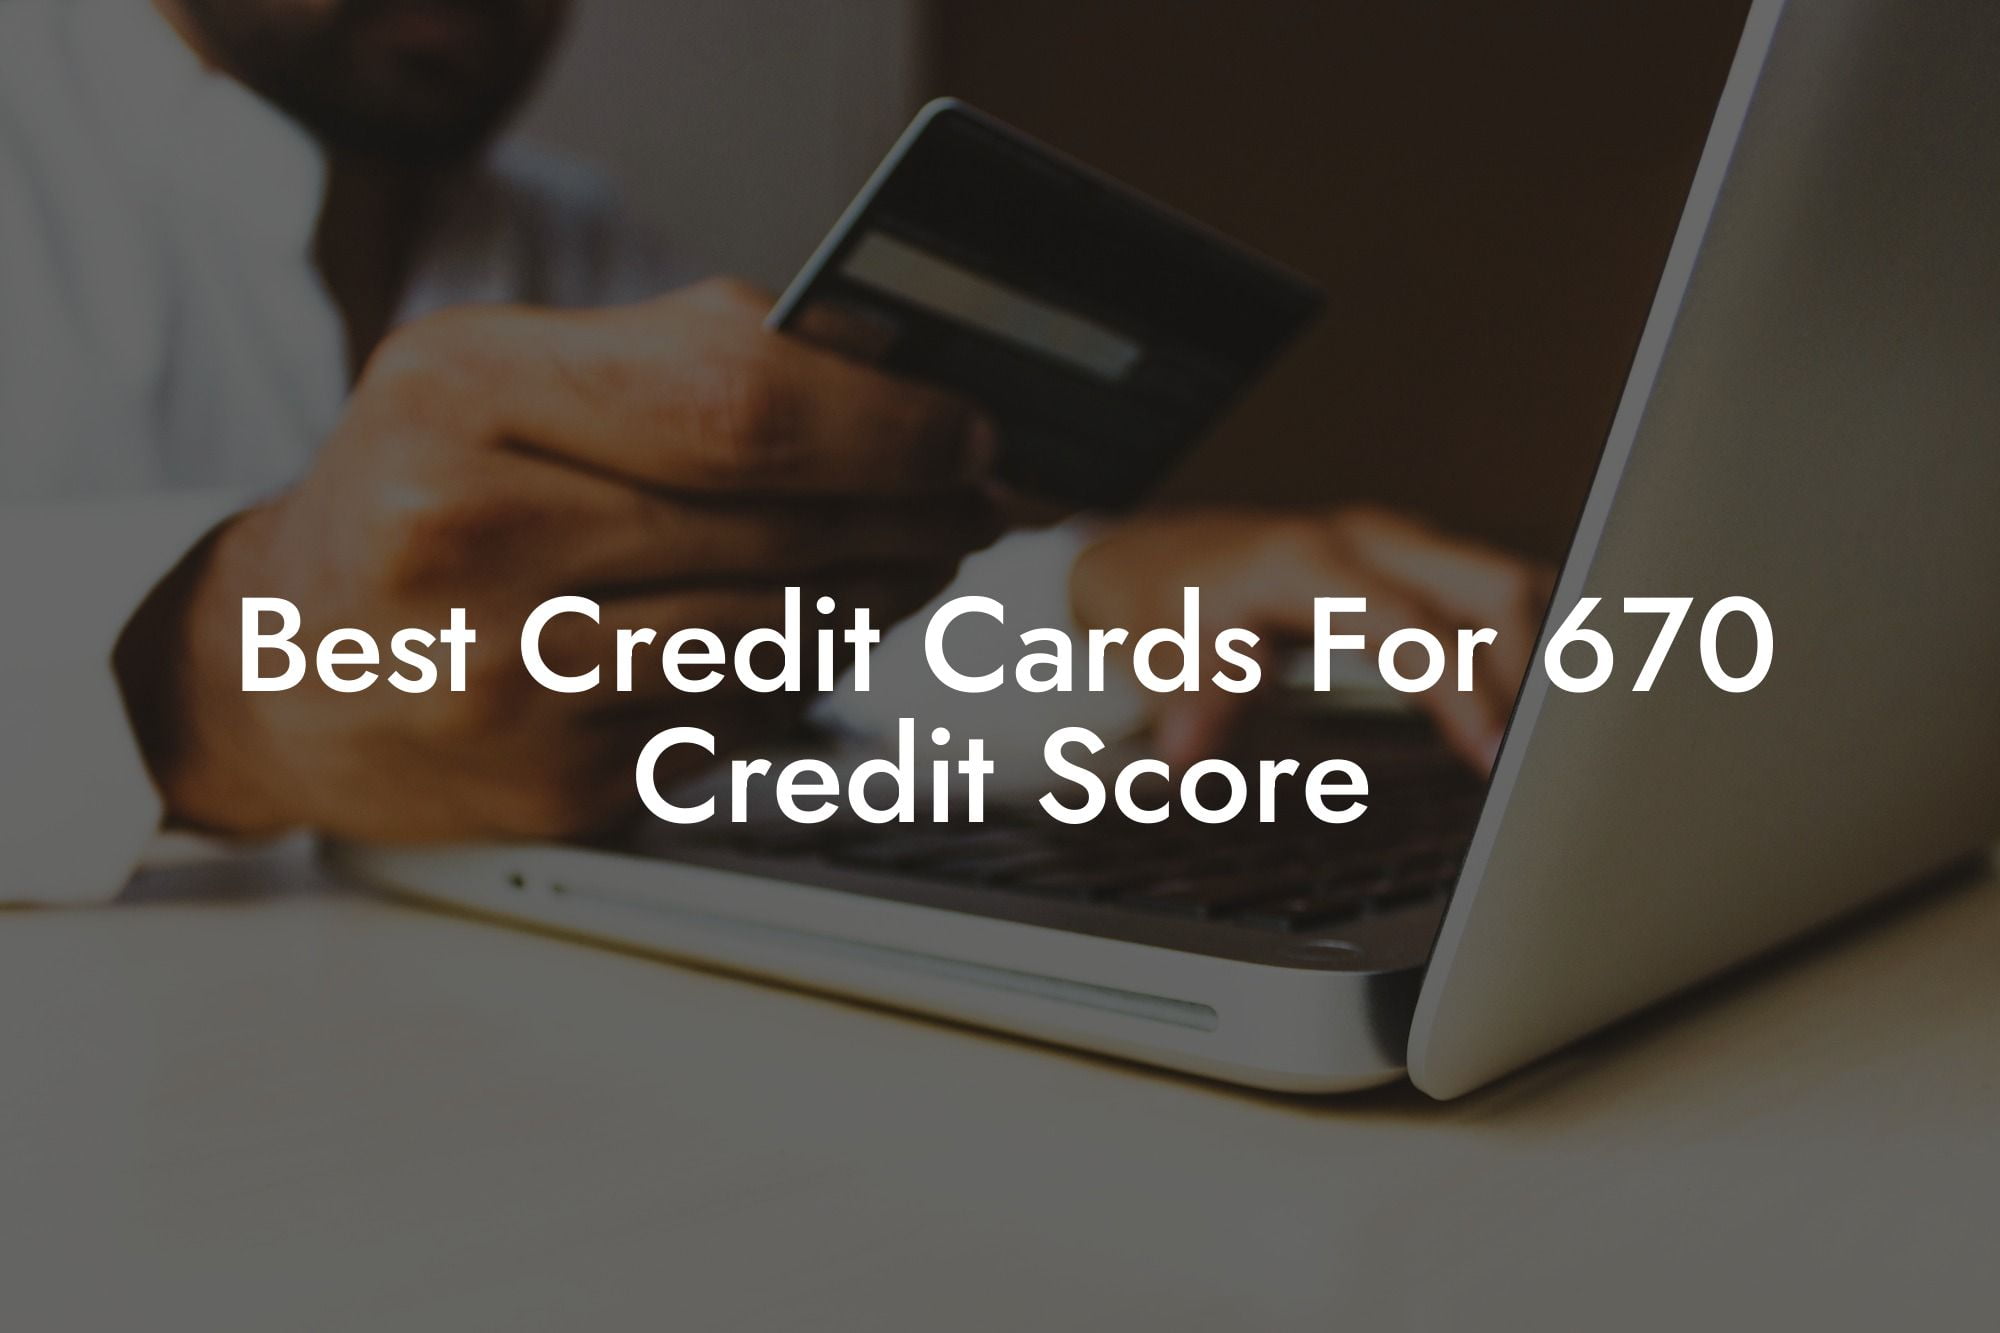 Best Credit Cards For 670 Credit Score